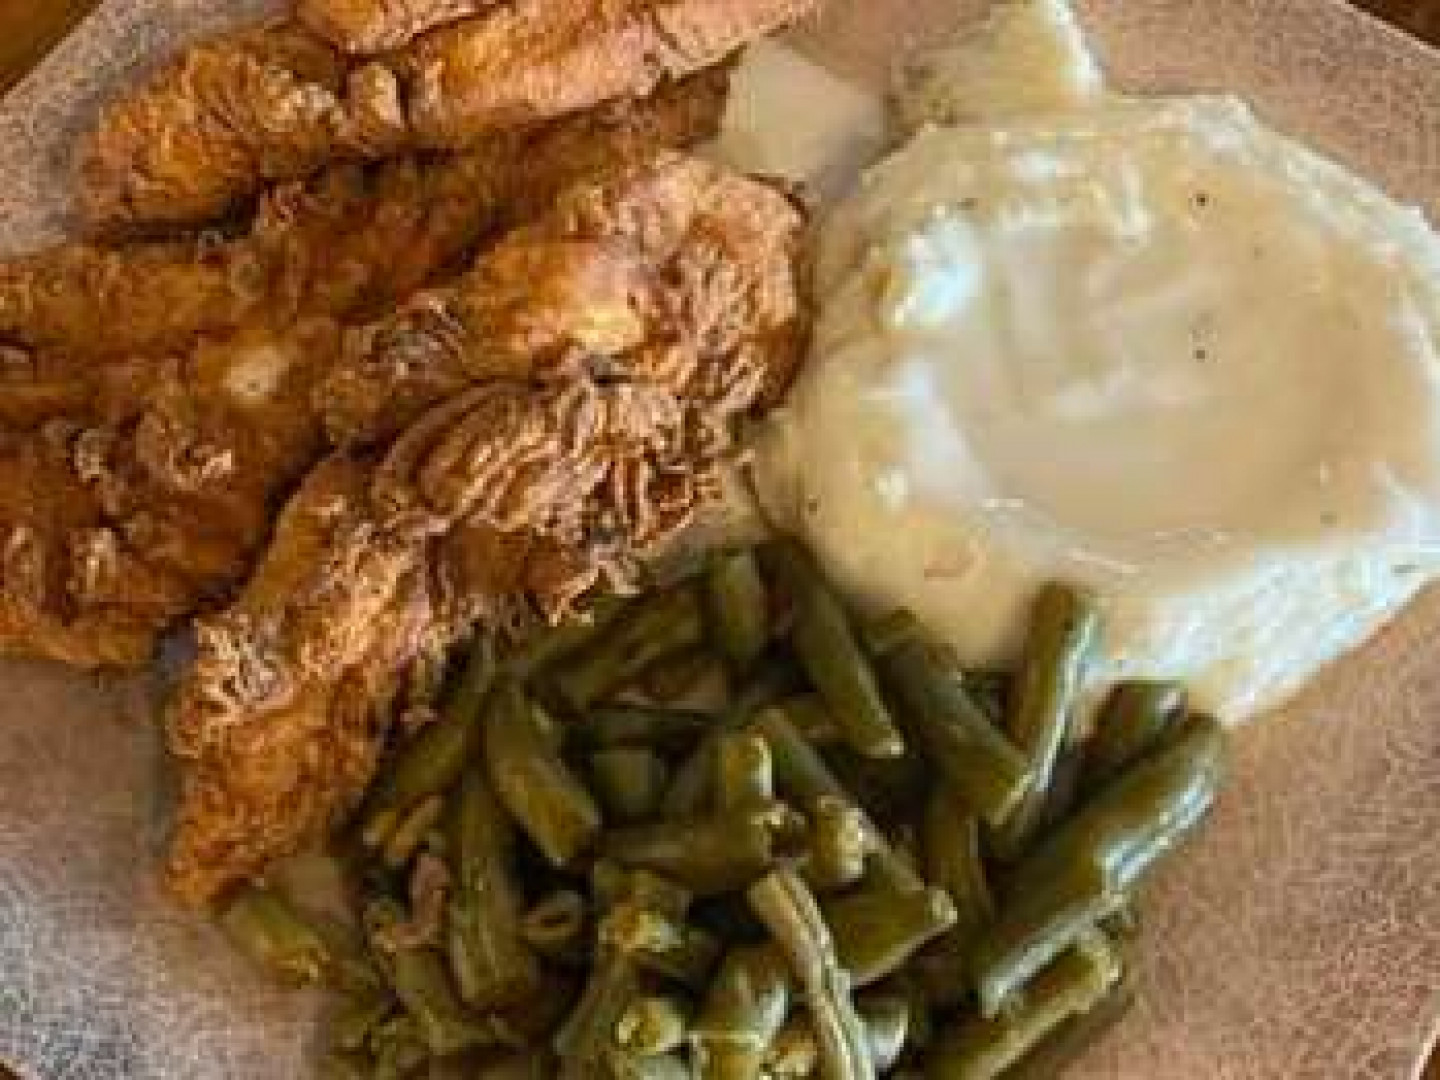 Fried Chicken, Lunch Specials | Boonville, IN | RJ's Restaurant and Bar